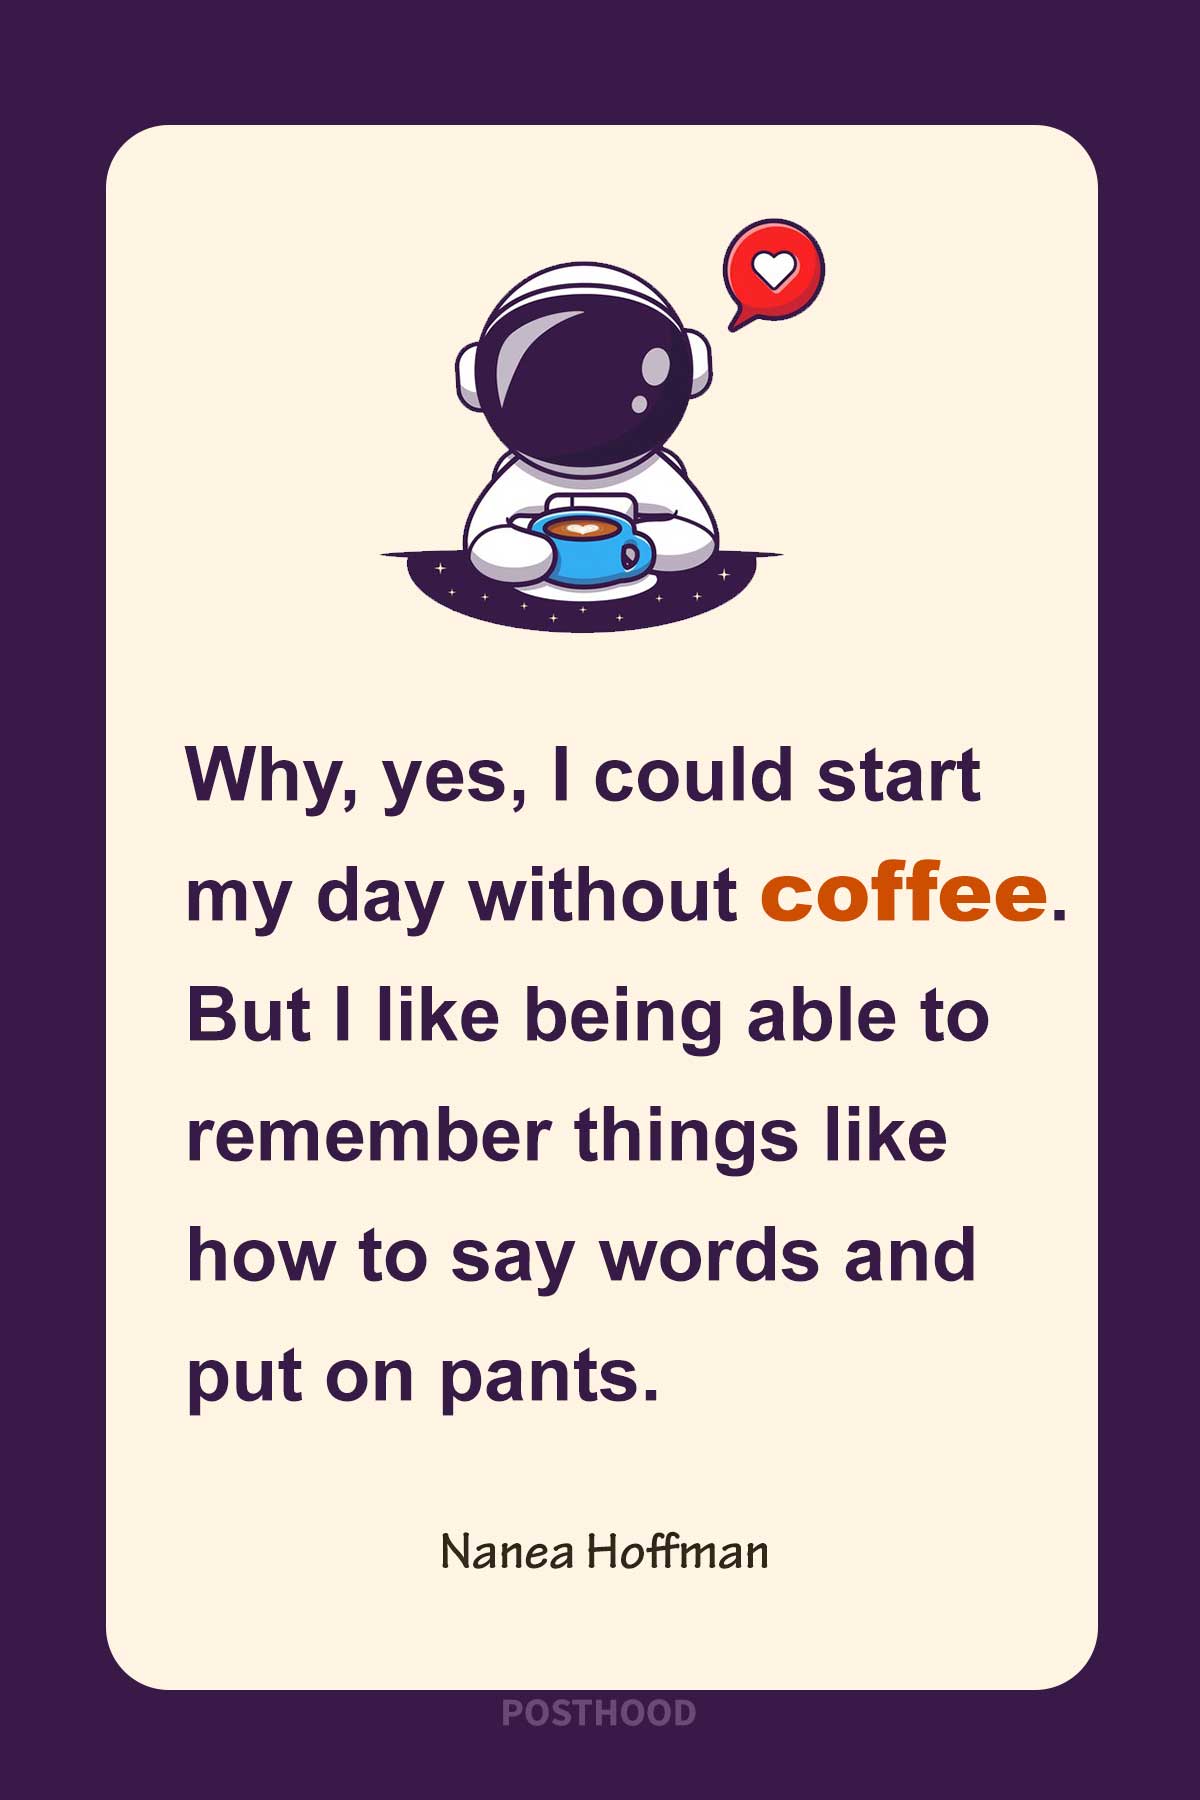 Honor your sacred relationship with coffee with these funny coffee quotes and share the love with the world! Hilarious coffee quotes for fun and laughter.